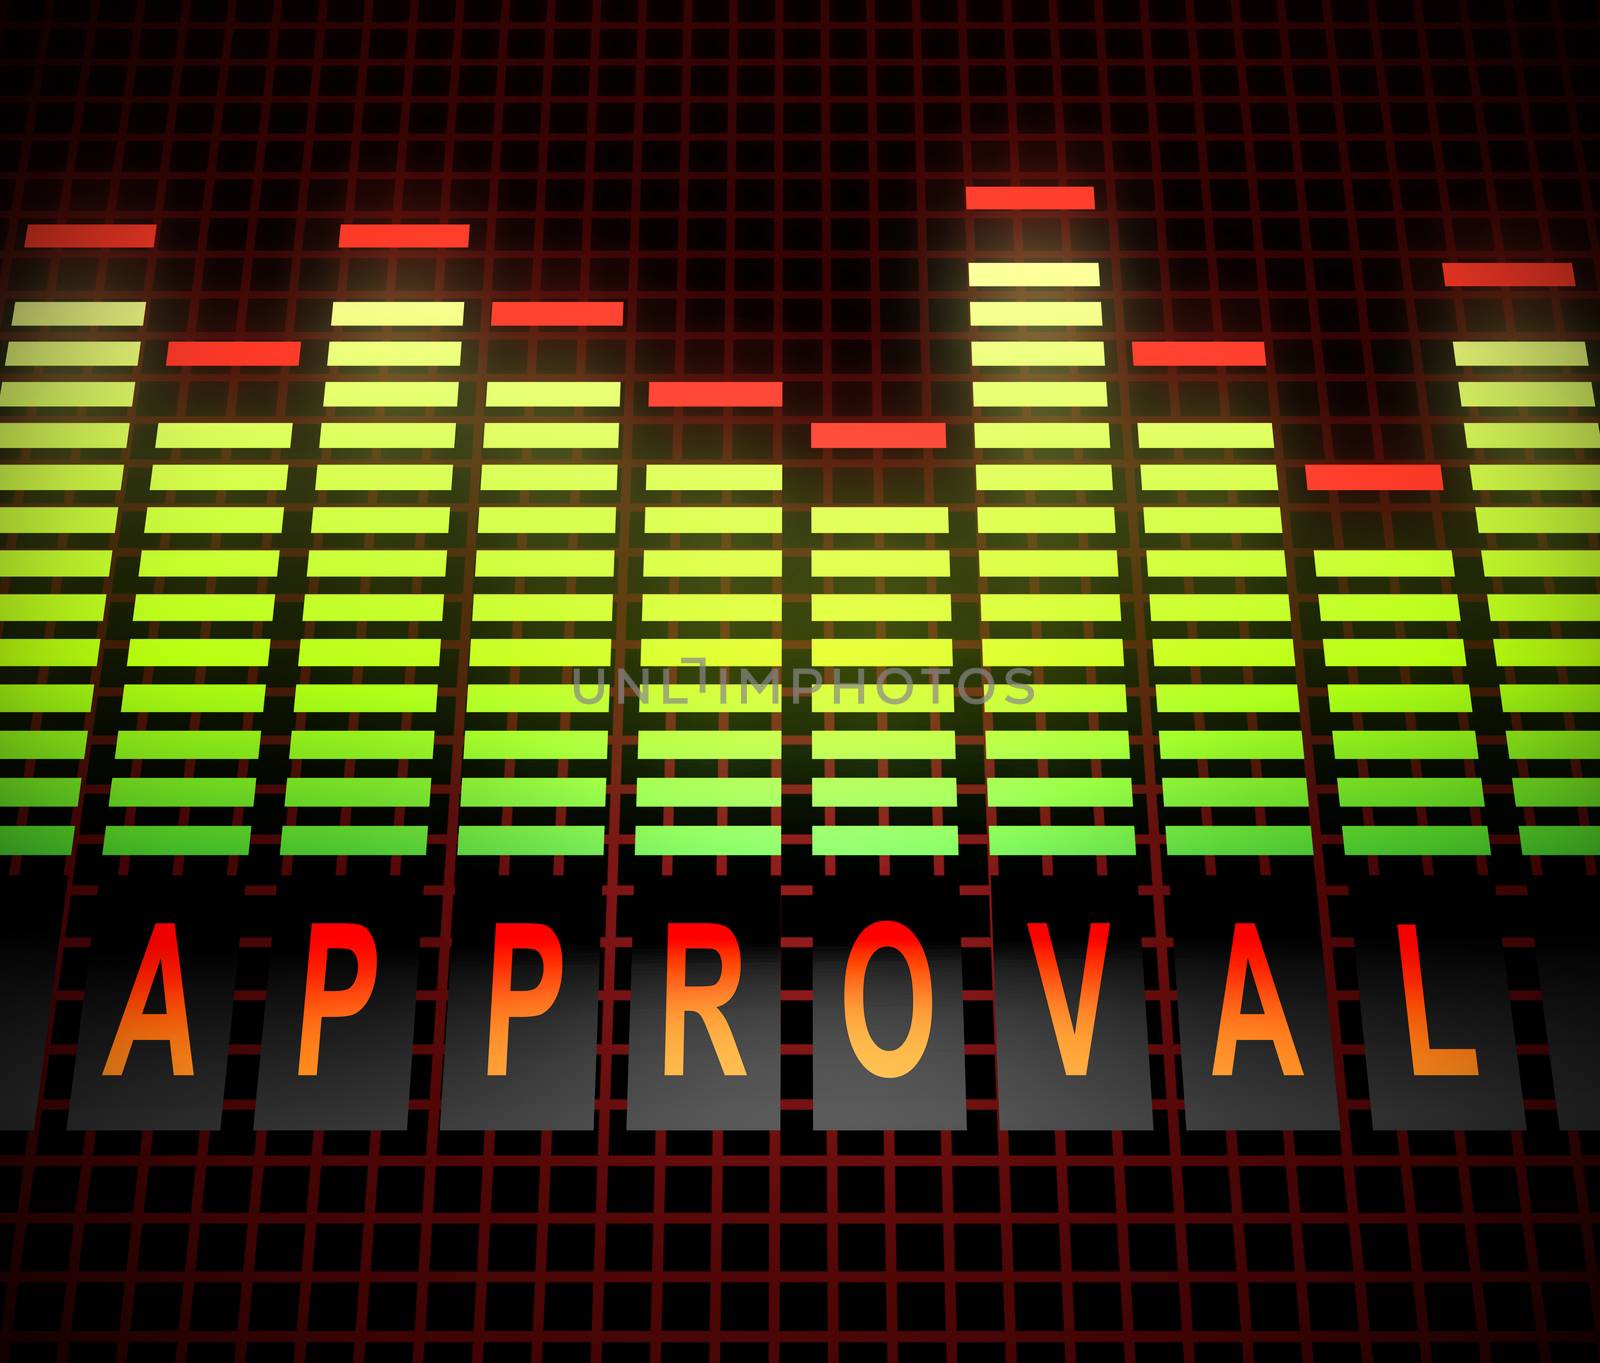 Approval levels concept. by 72soul